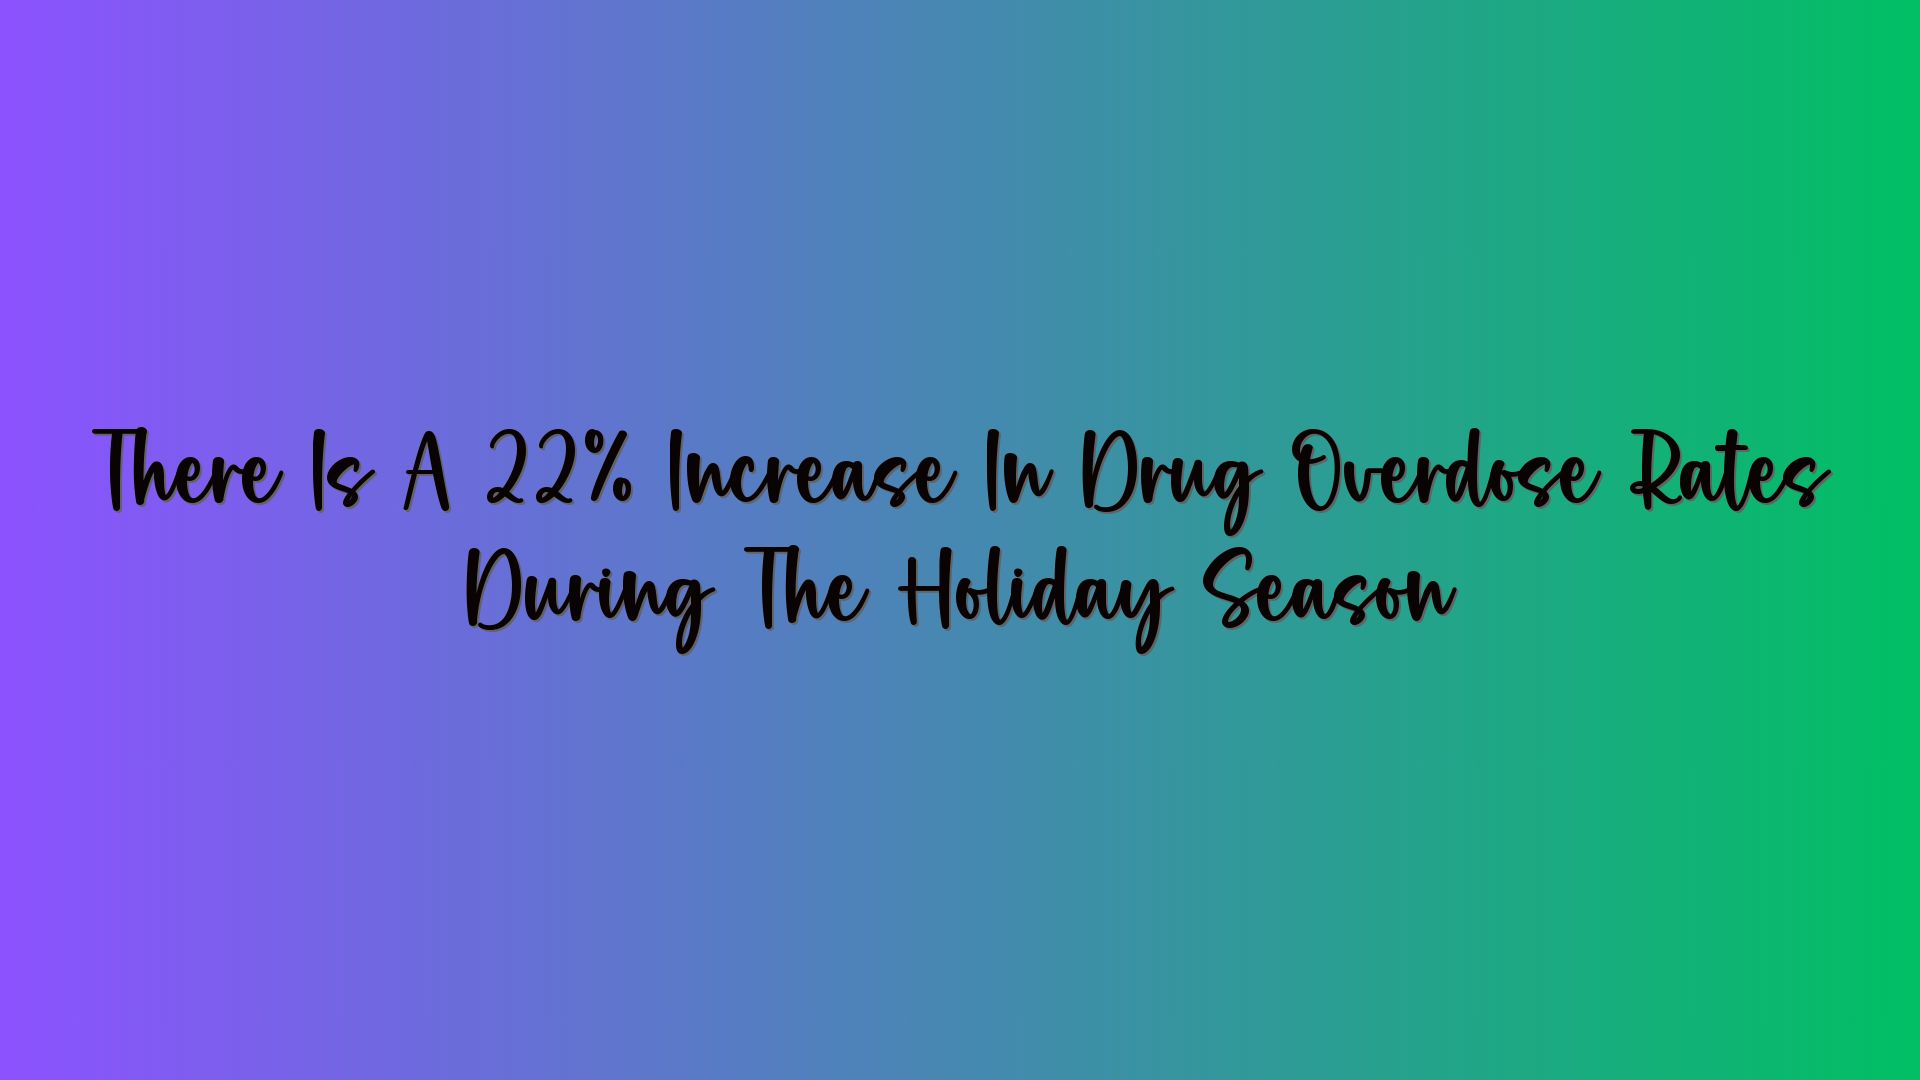 There Is A 22% Increase In Drug Overdose Rates During The Holiday Season